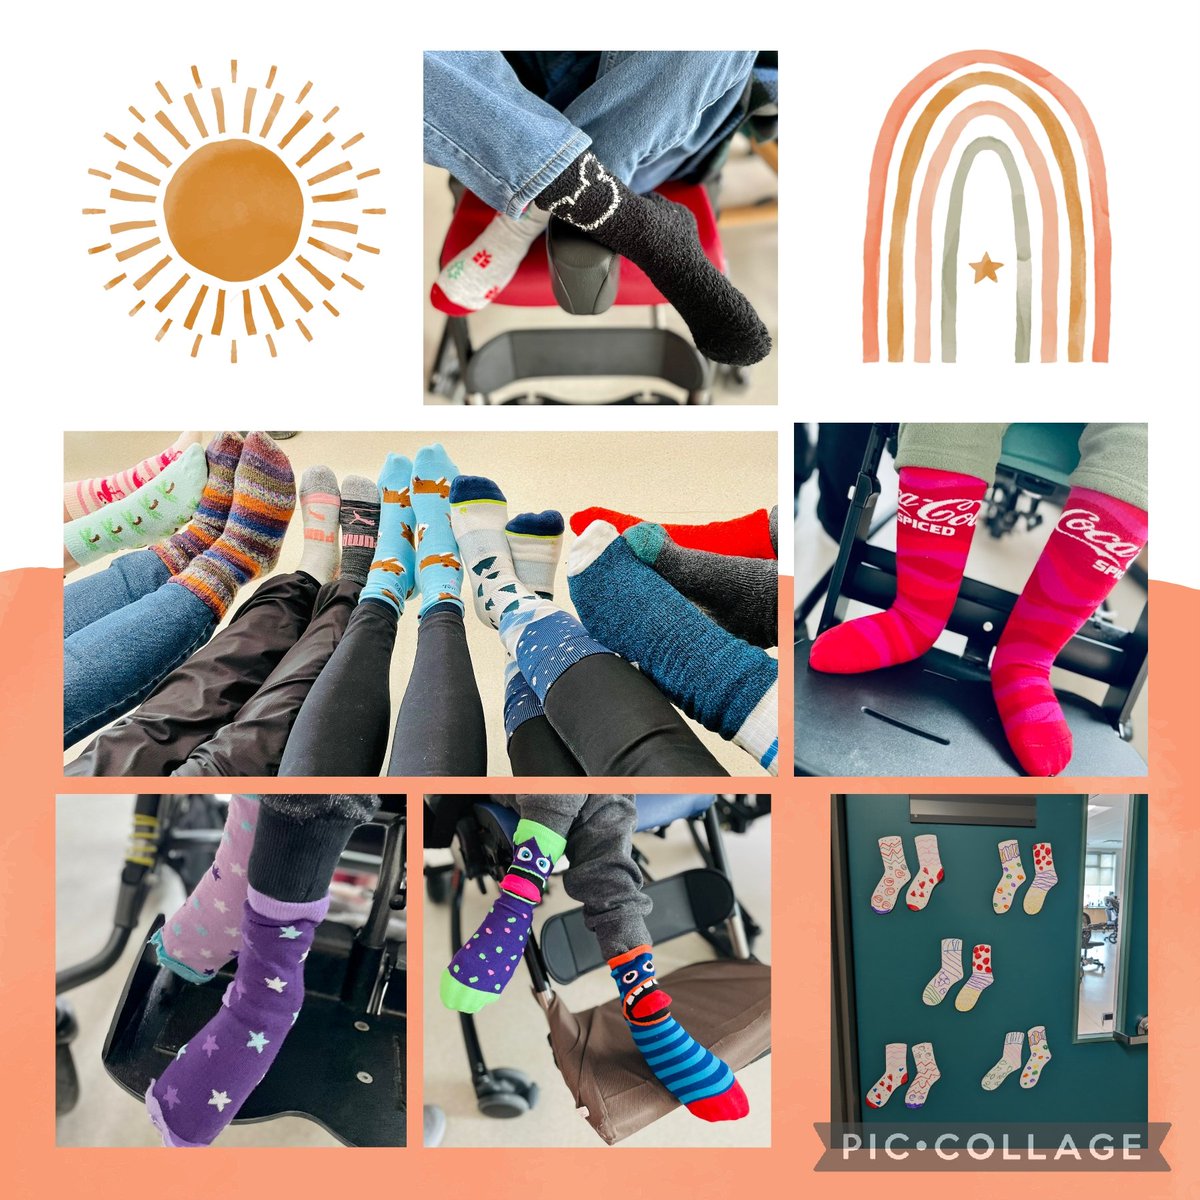 Today we are rocking our socks for #WorldDownSyndromeDay . Today and everyday, we come together to remove barriers, bring awareness and celebrate diversity and inclusion! @MotherTeresaOak @hcdsbSEAC